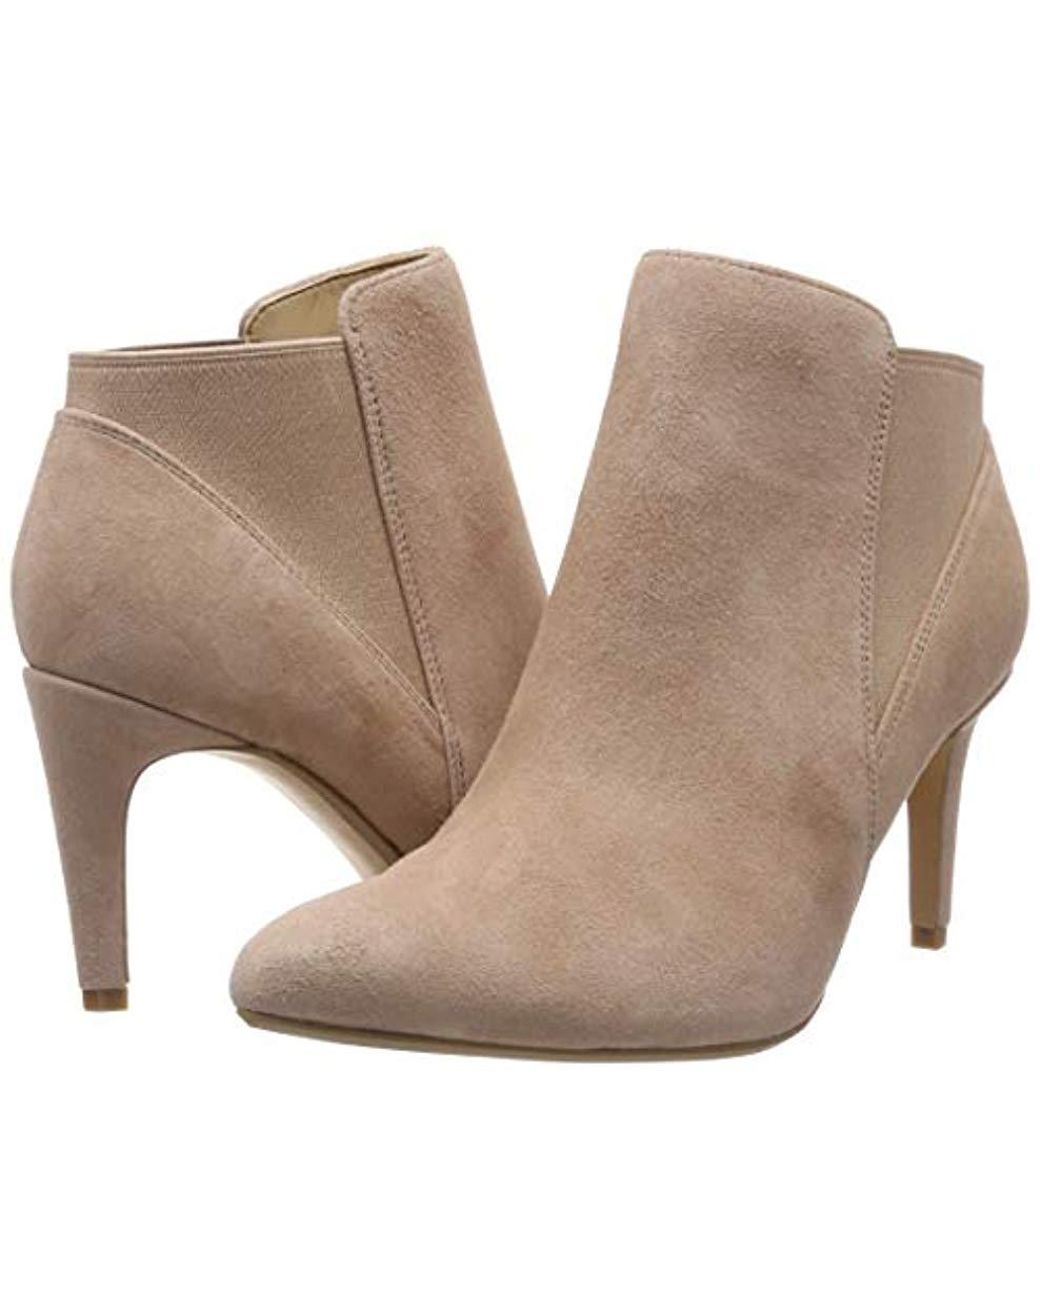 Clarks Laina Violet Ankle Boots in Natural | Lyst UK